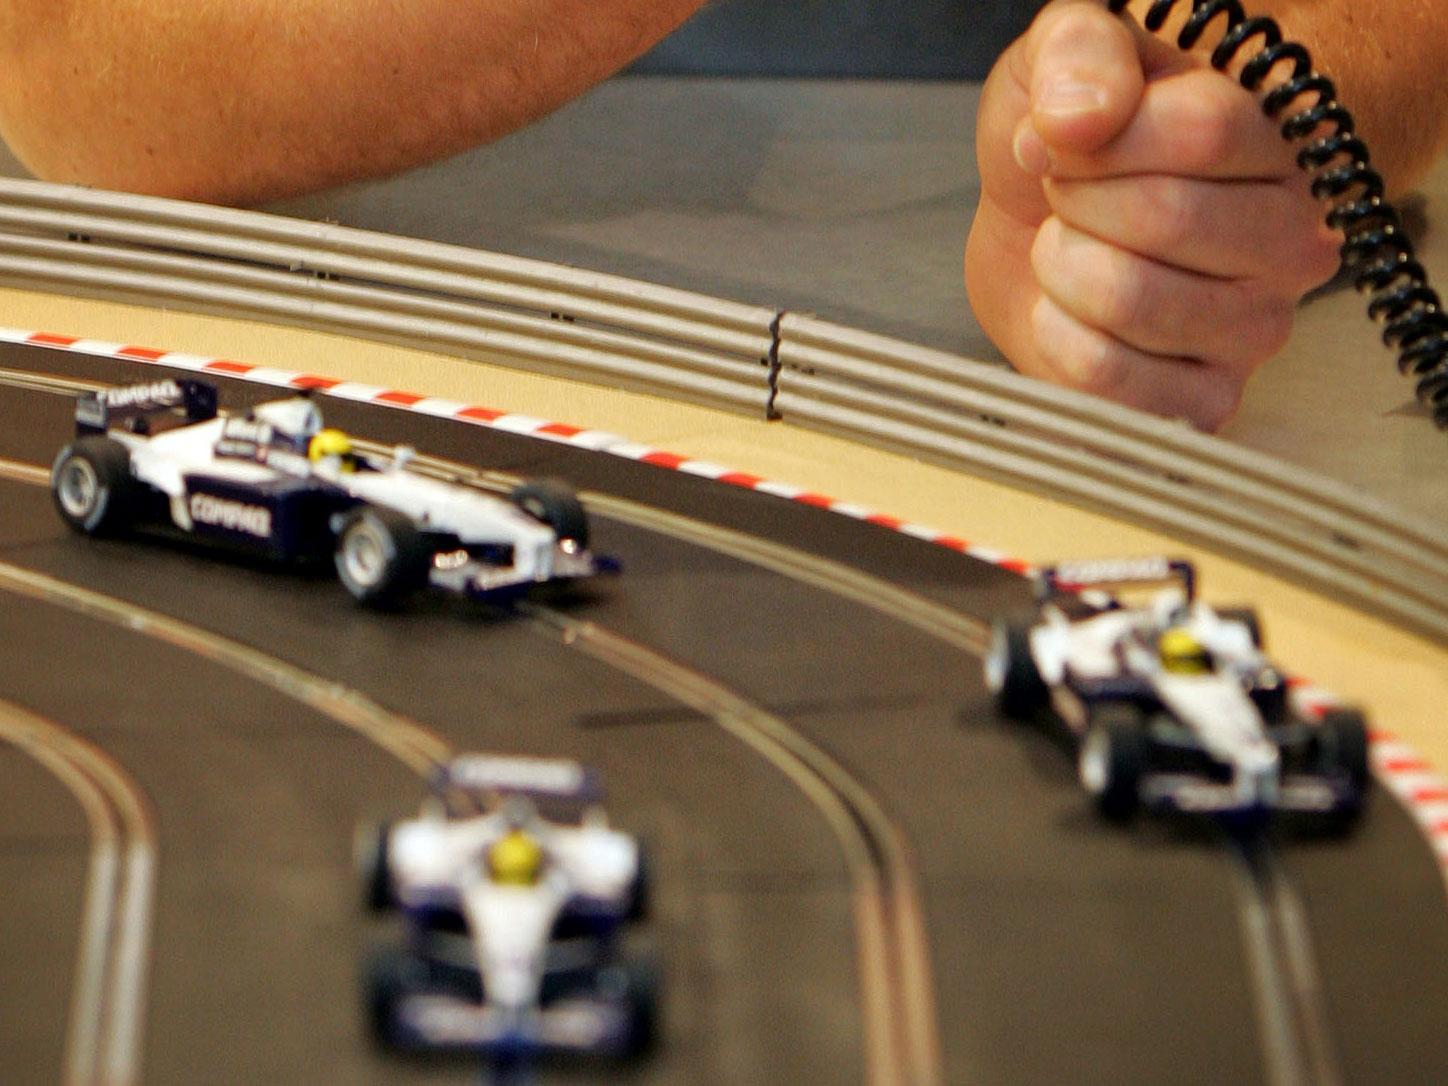 Roads could turn into a full-size version of the children's toy, Scalextric